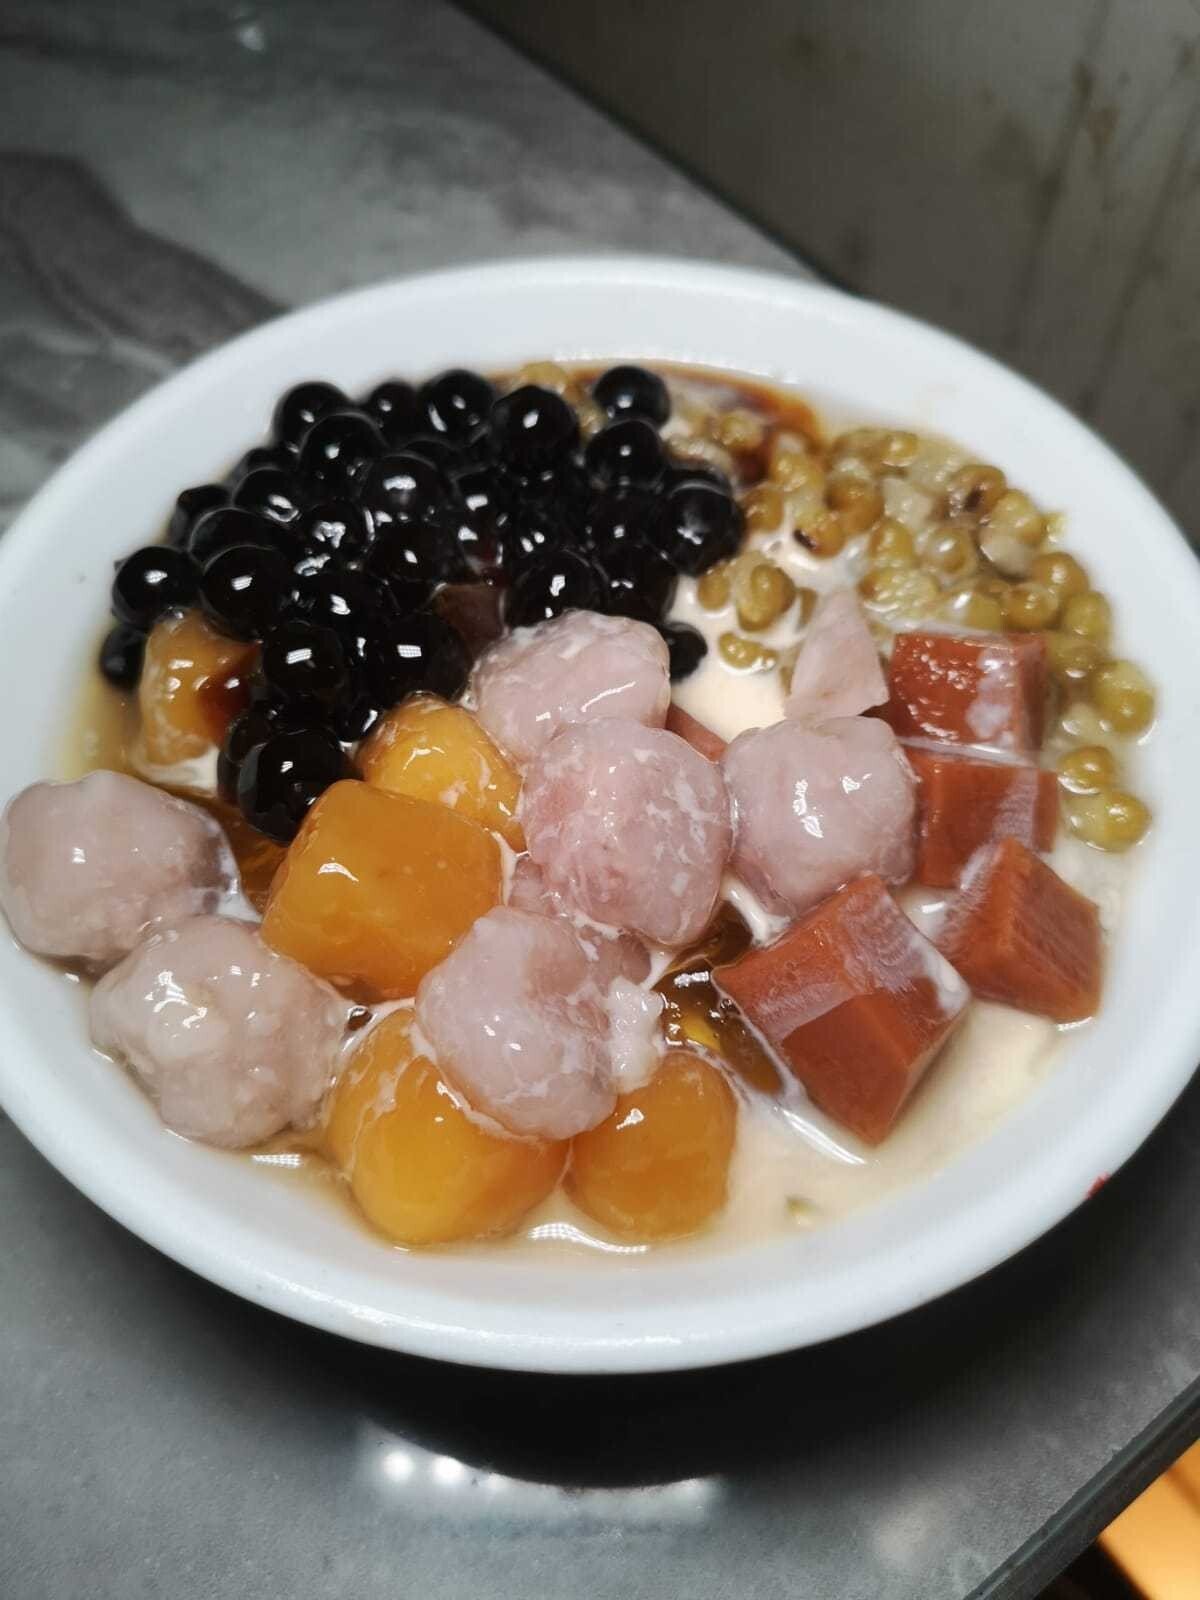 Taro balls dessert, lots going on and it might not be to your liking. 